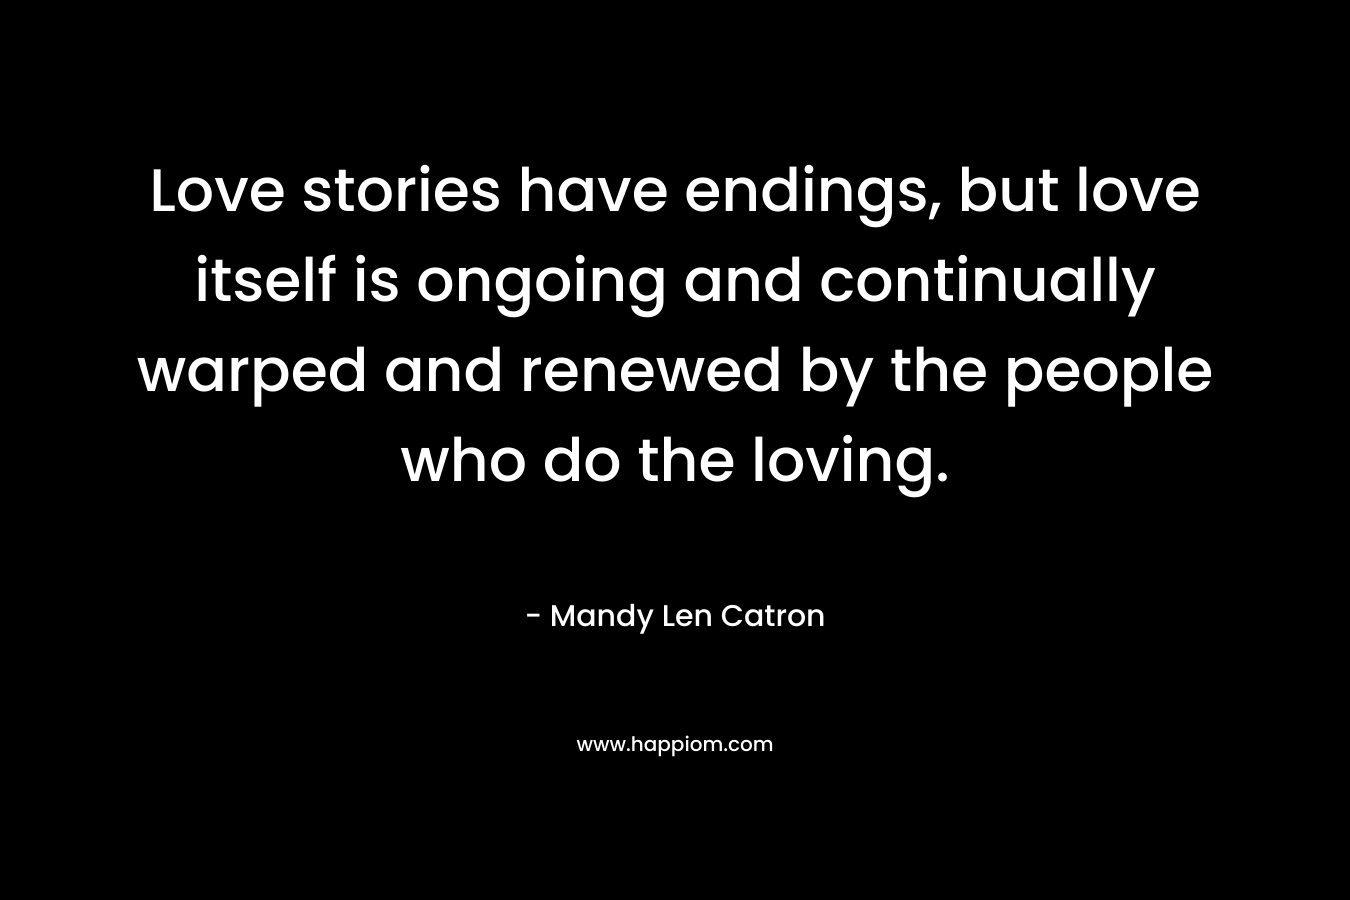 Love stories have endings, but love itself is ongoing and continually warped and renewed by the people who do the loving.